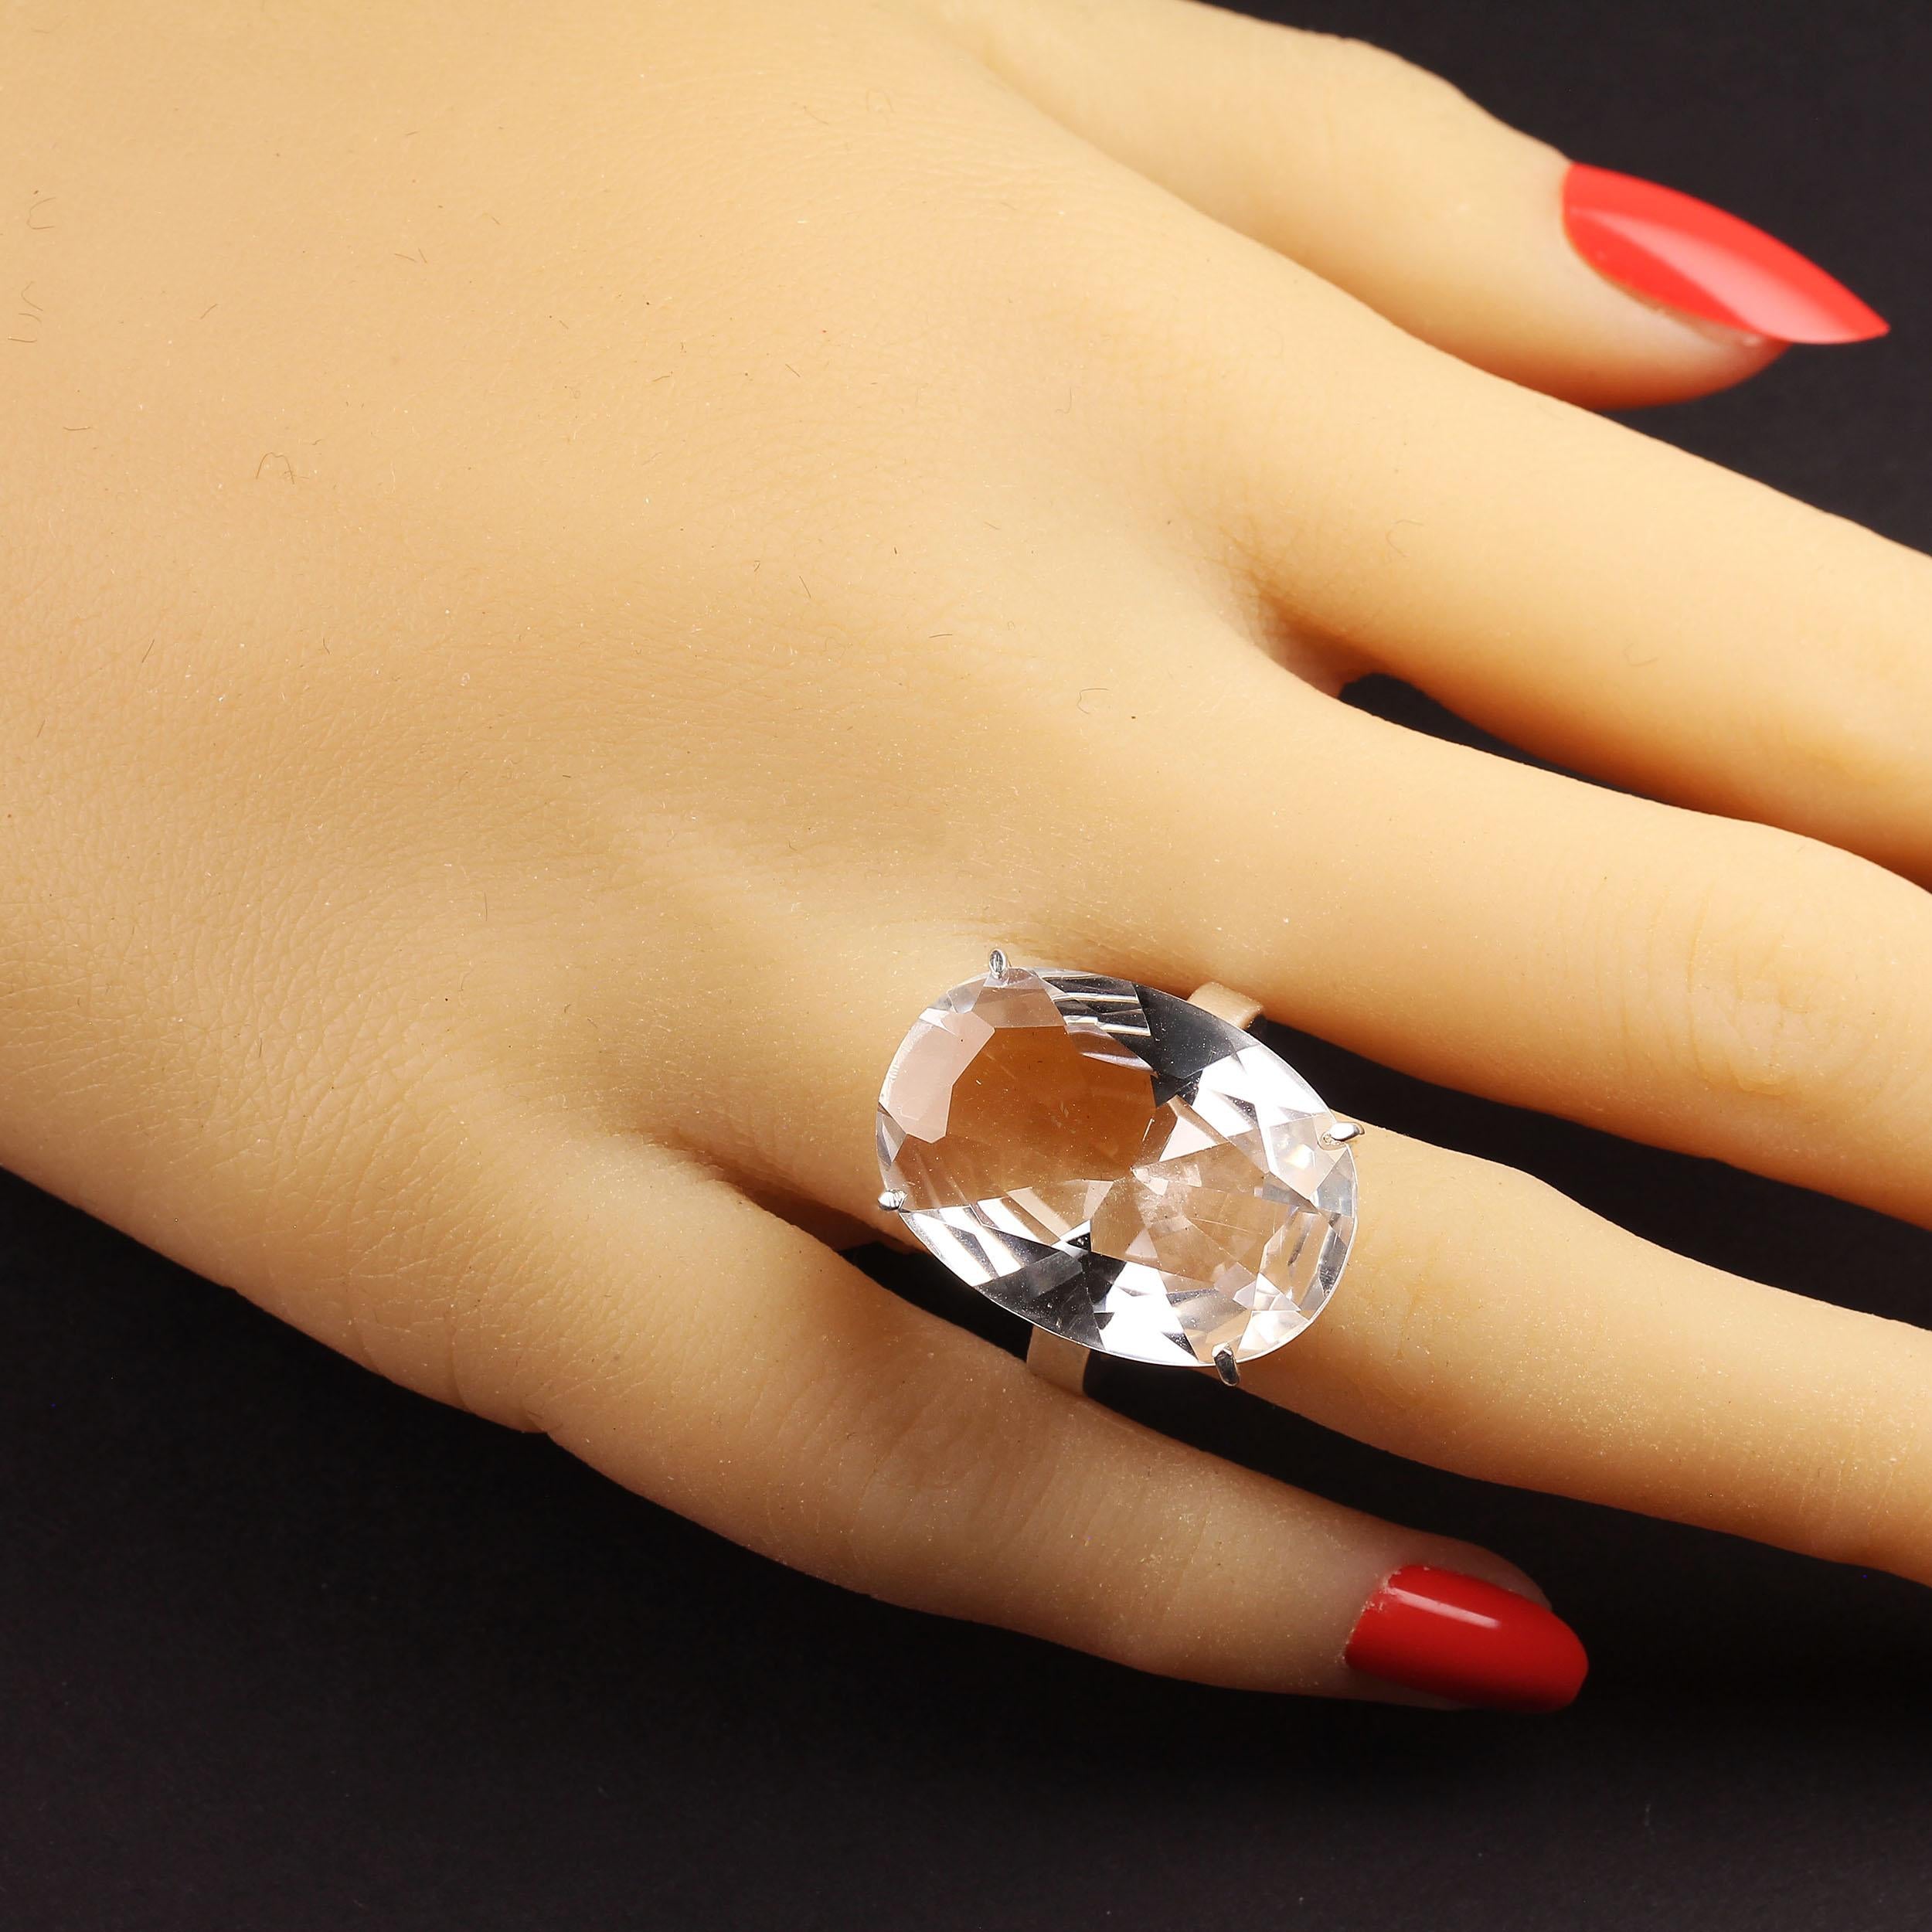 This sparkling oval fancy cut Quartz Crystal and Sterling Silver ring is just what you need for summer. This gorgeous quartz crystal is supposed to be an amplifying stone which means that whatever you put into it, it will return many times. Think of